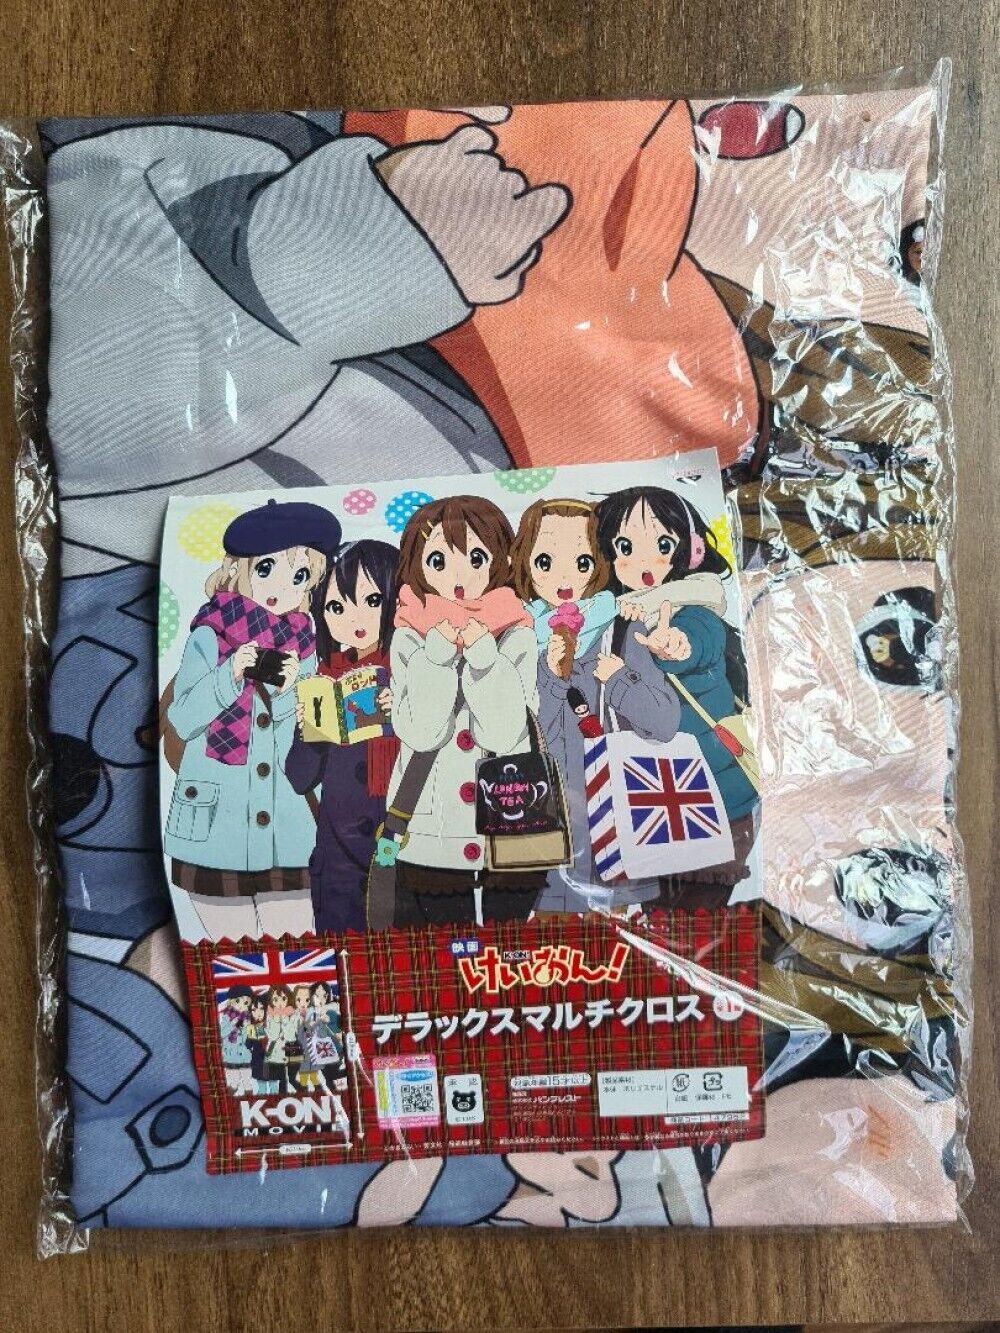 K-ON the Movie Deluxe Multi Cloth H190cm